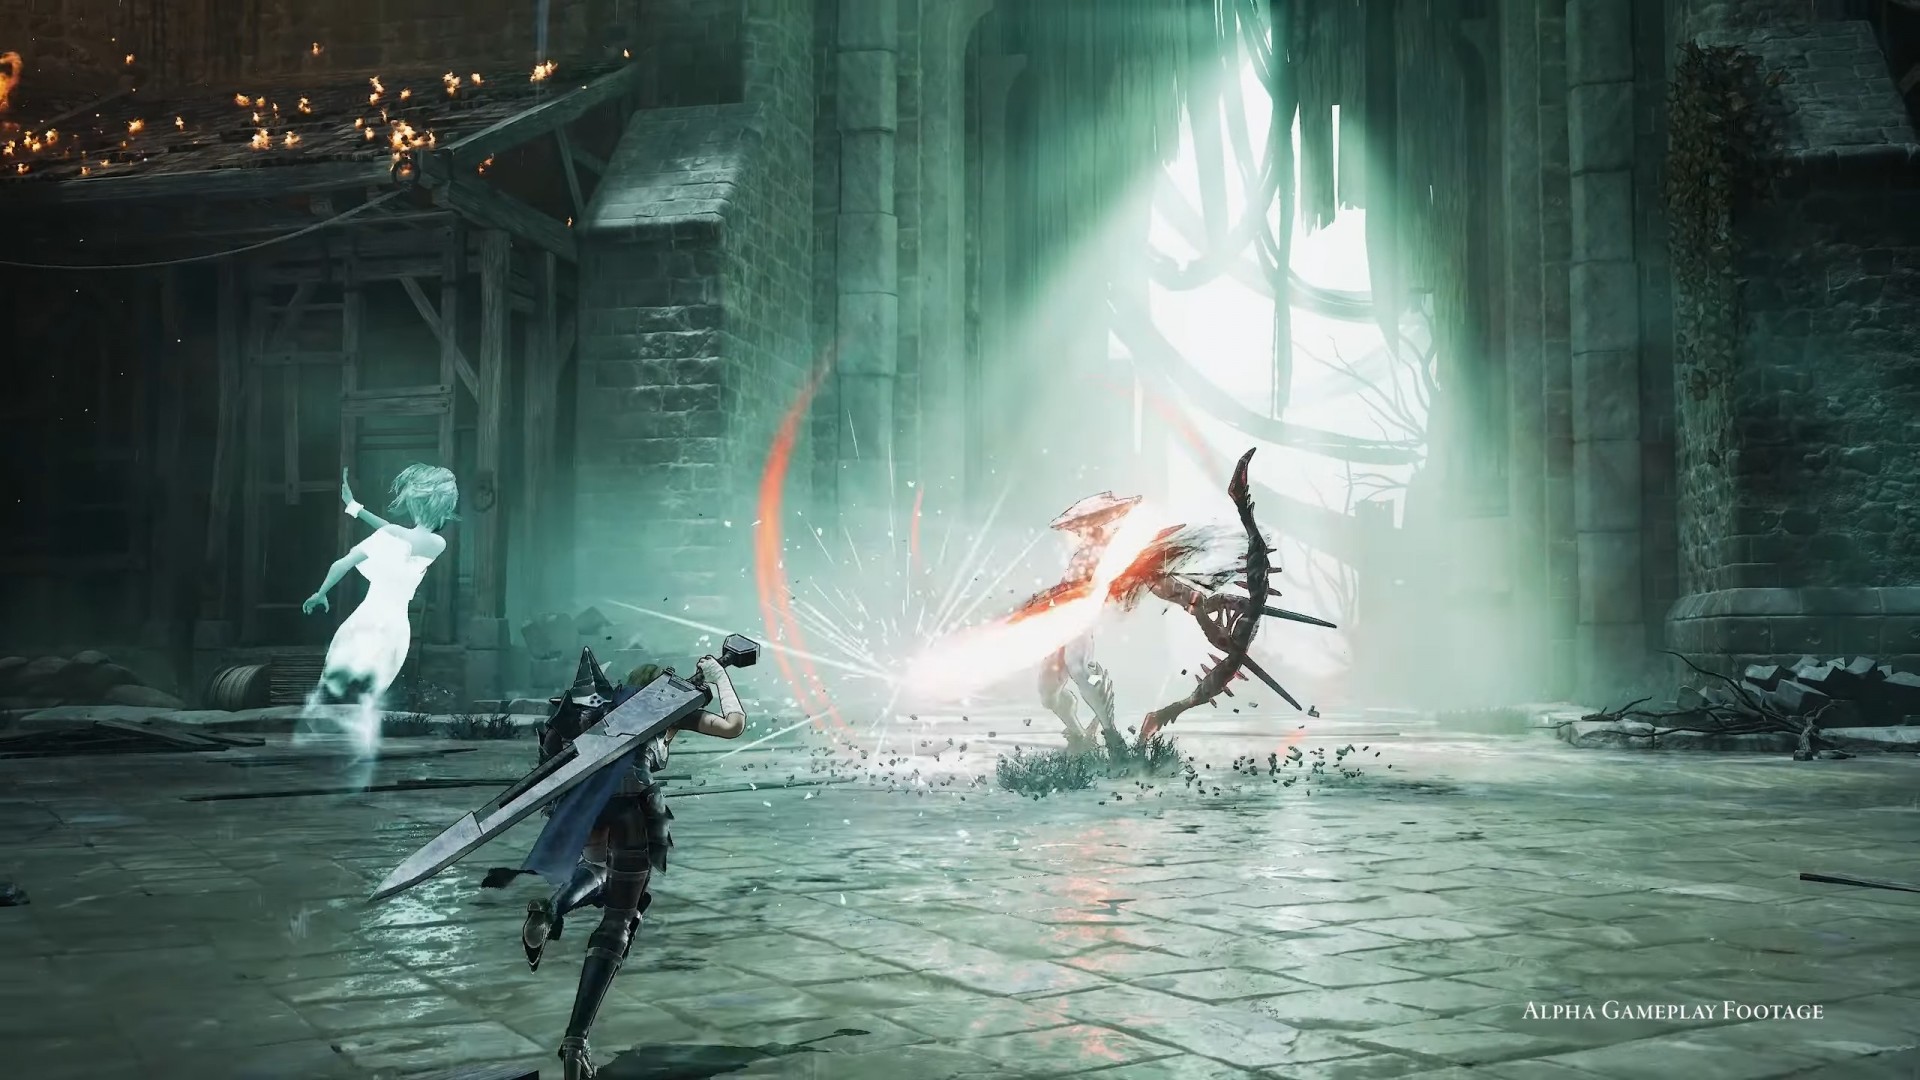 Action RPG 'Soulstice' Gets New Gameplay Trailer Demonstrating